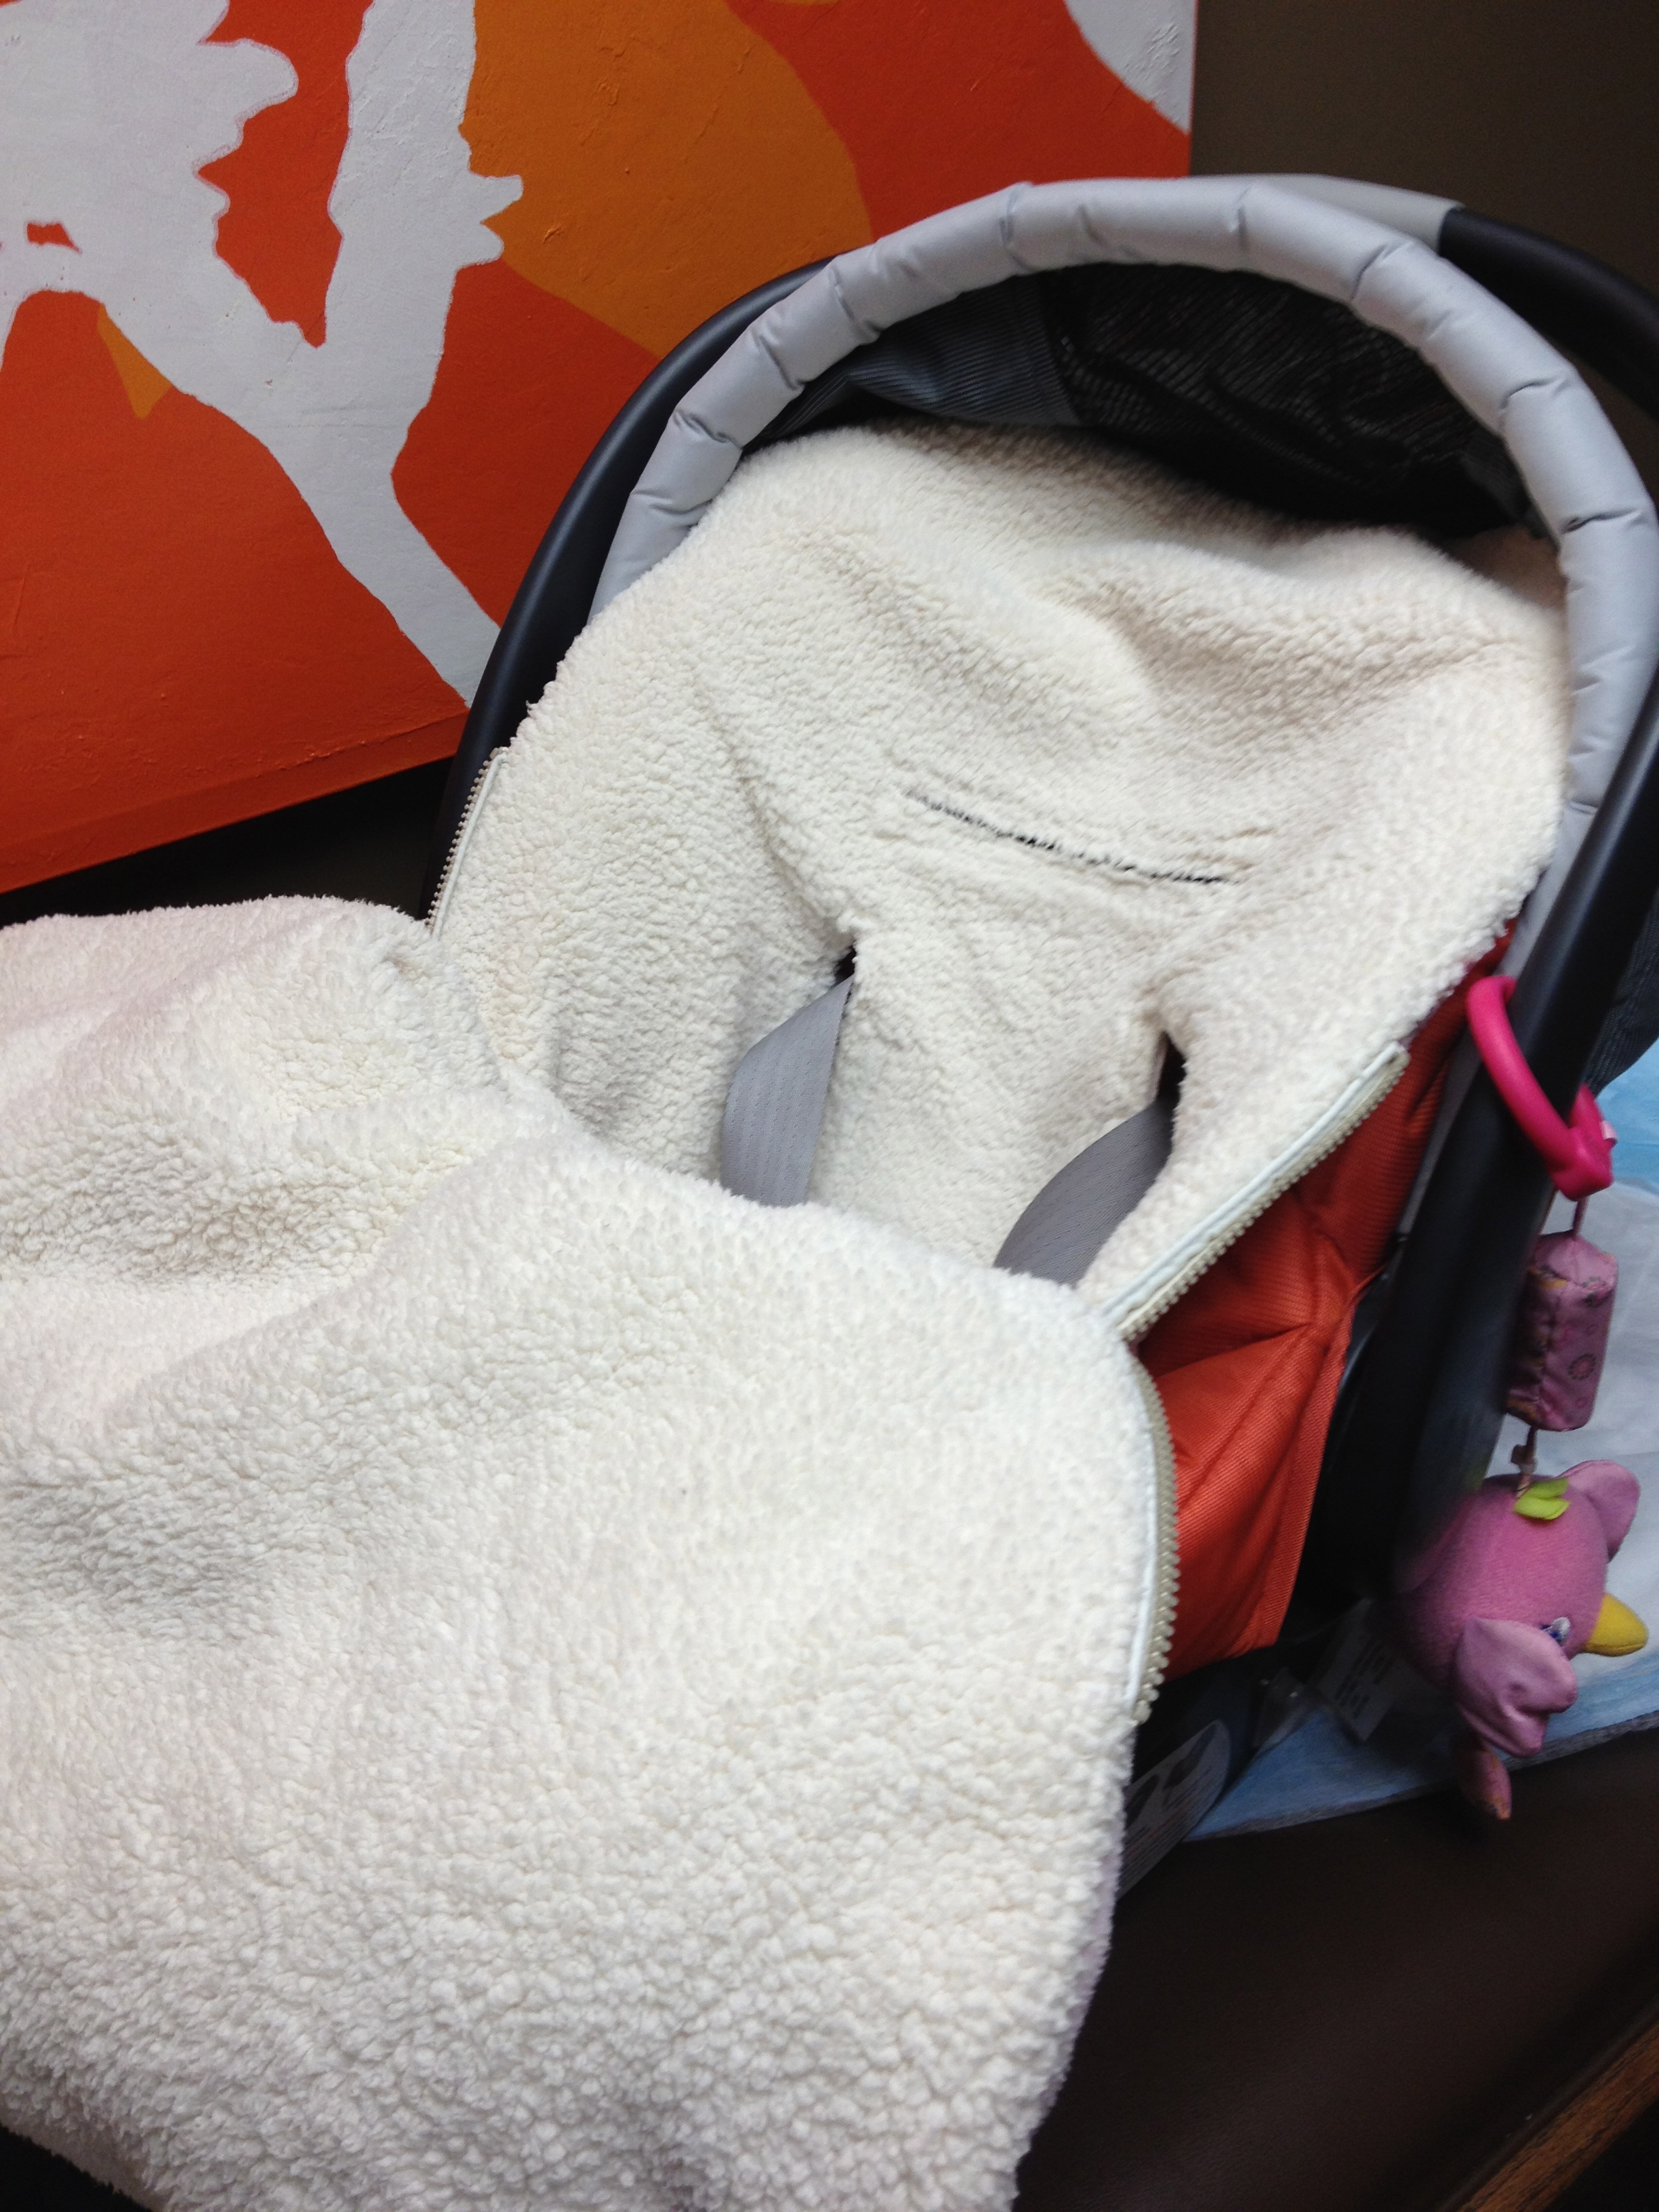 Bundle your kids up for winter, but not in their car seats